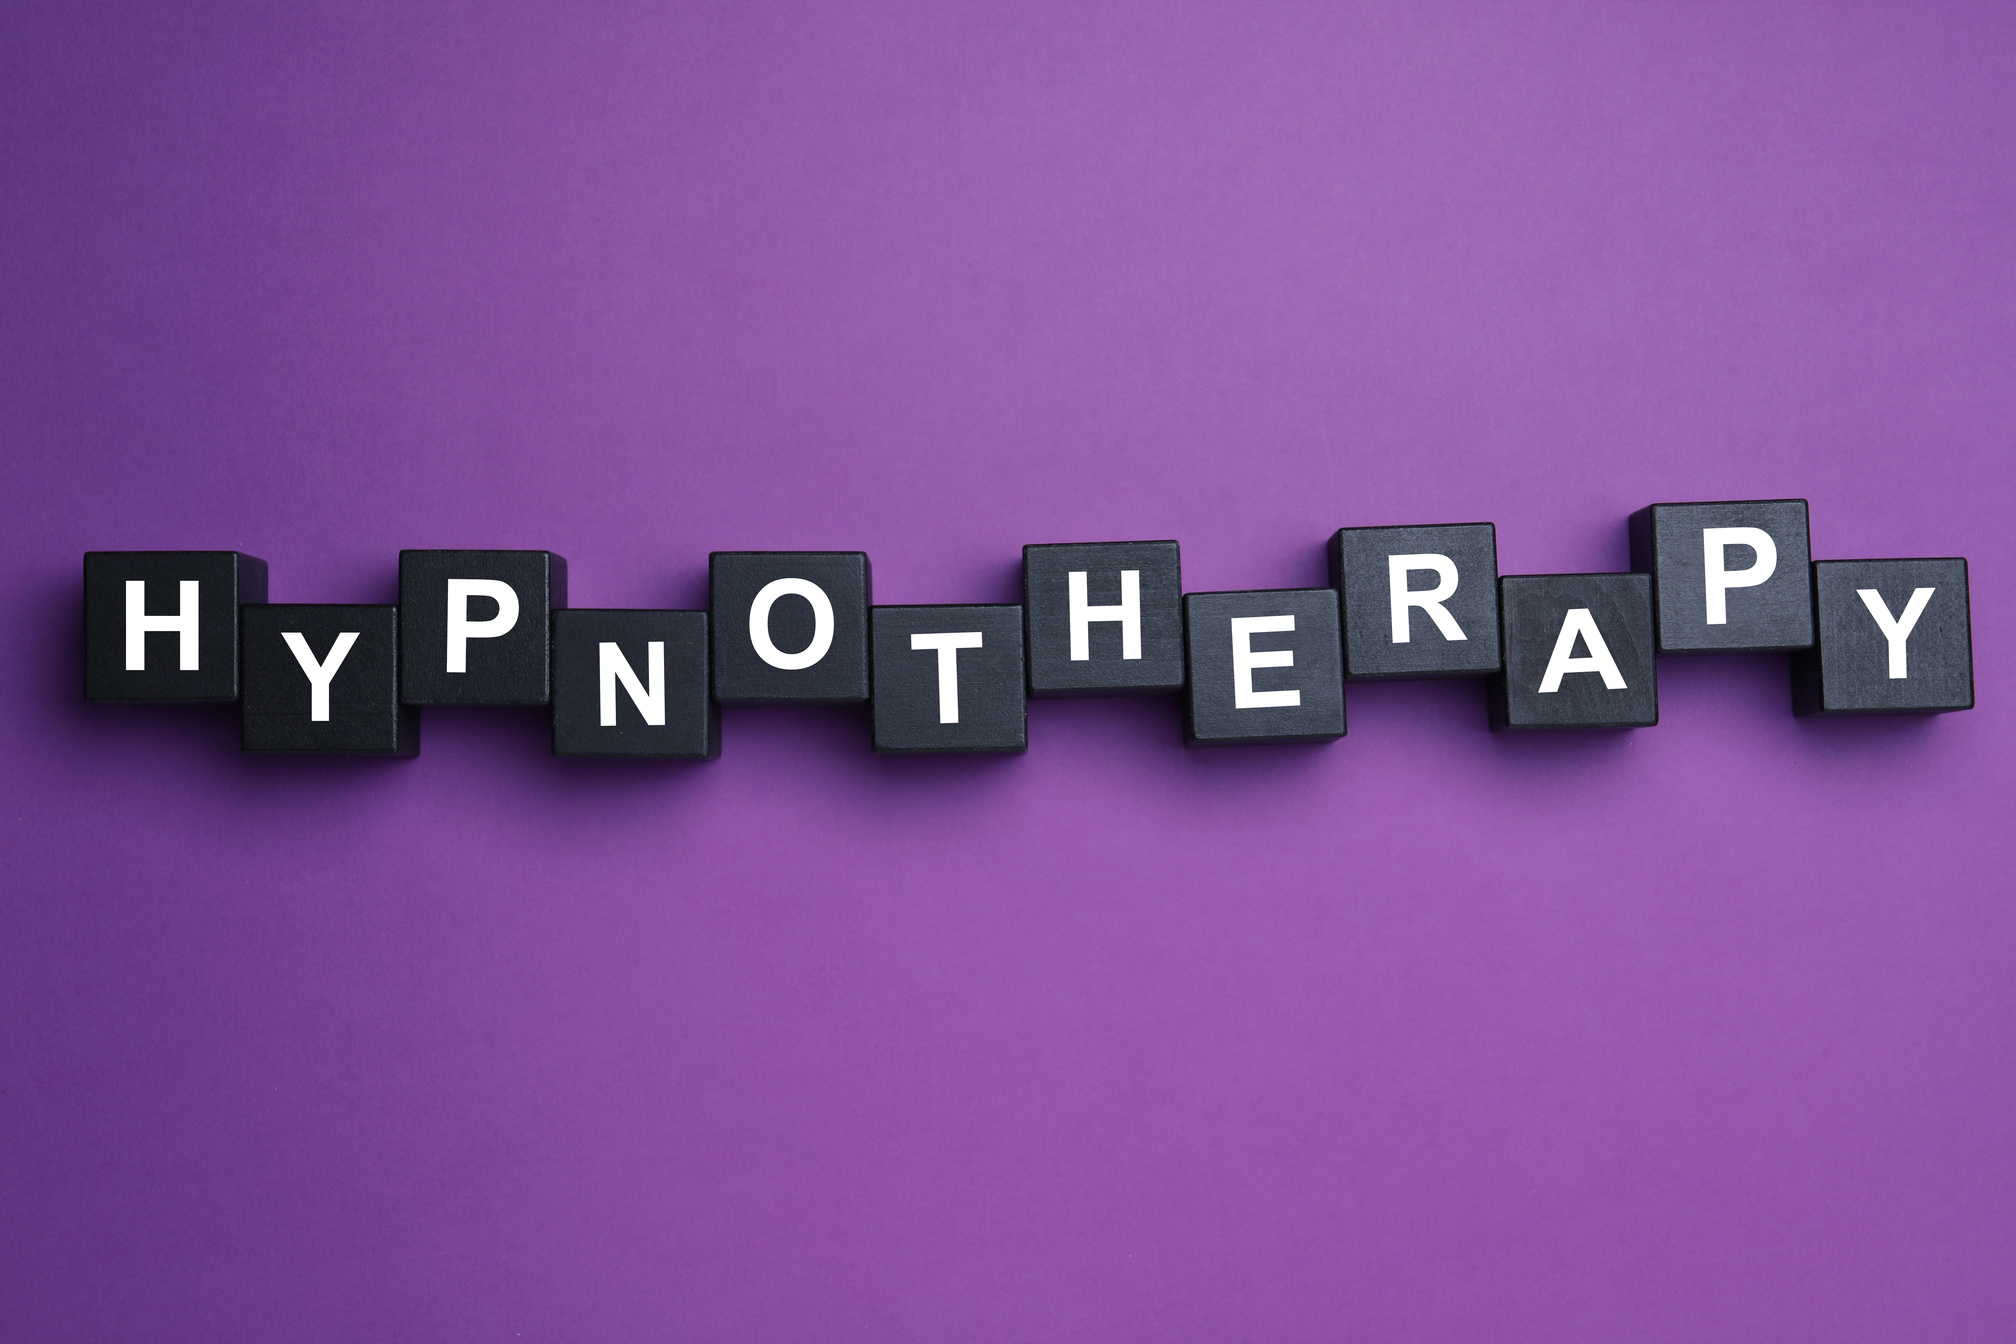 Black Wooden Blocks with Word HYPNOTHERAPY on Purple Background,